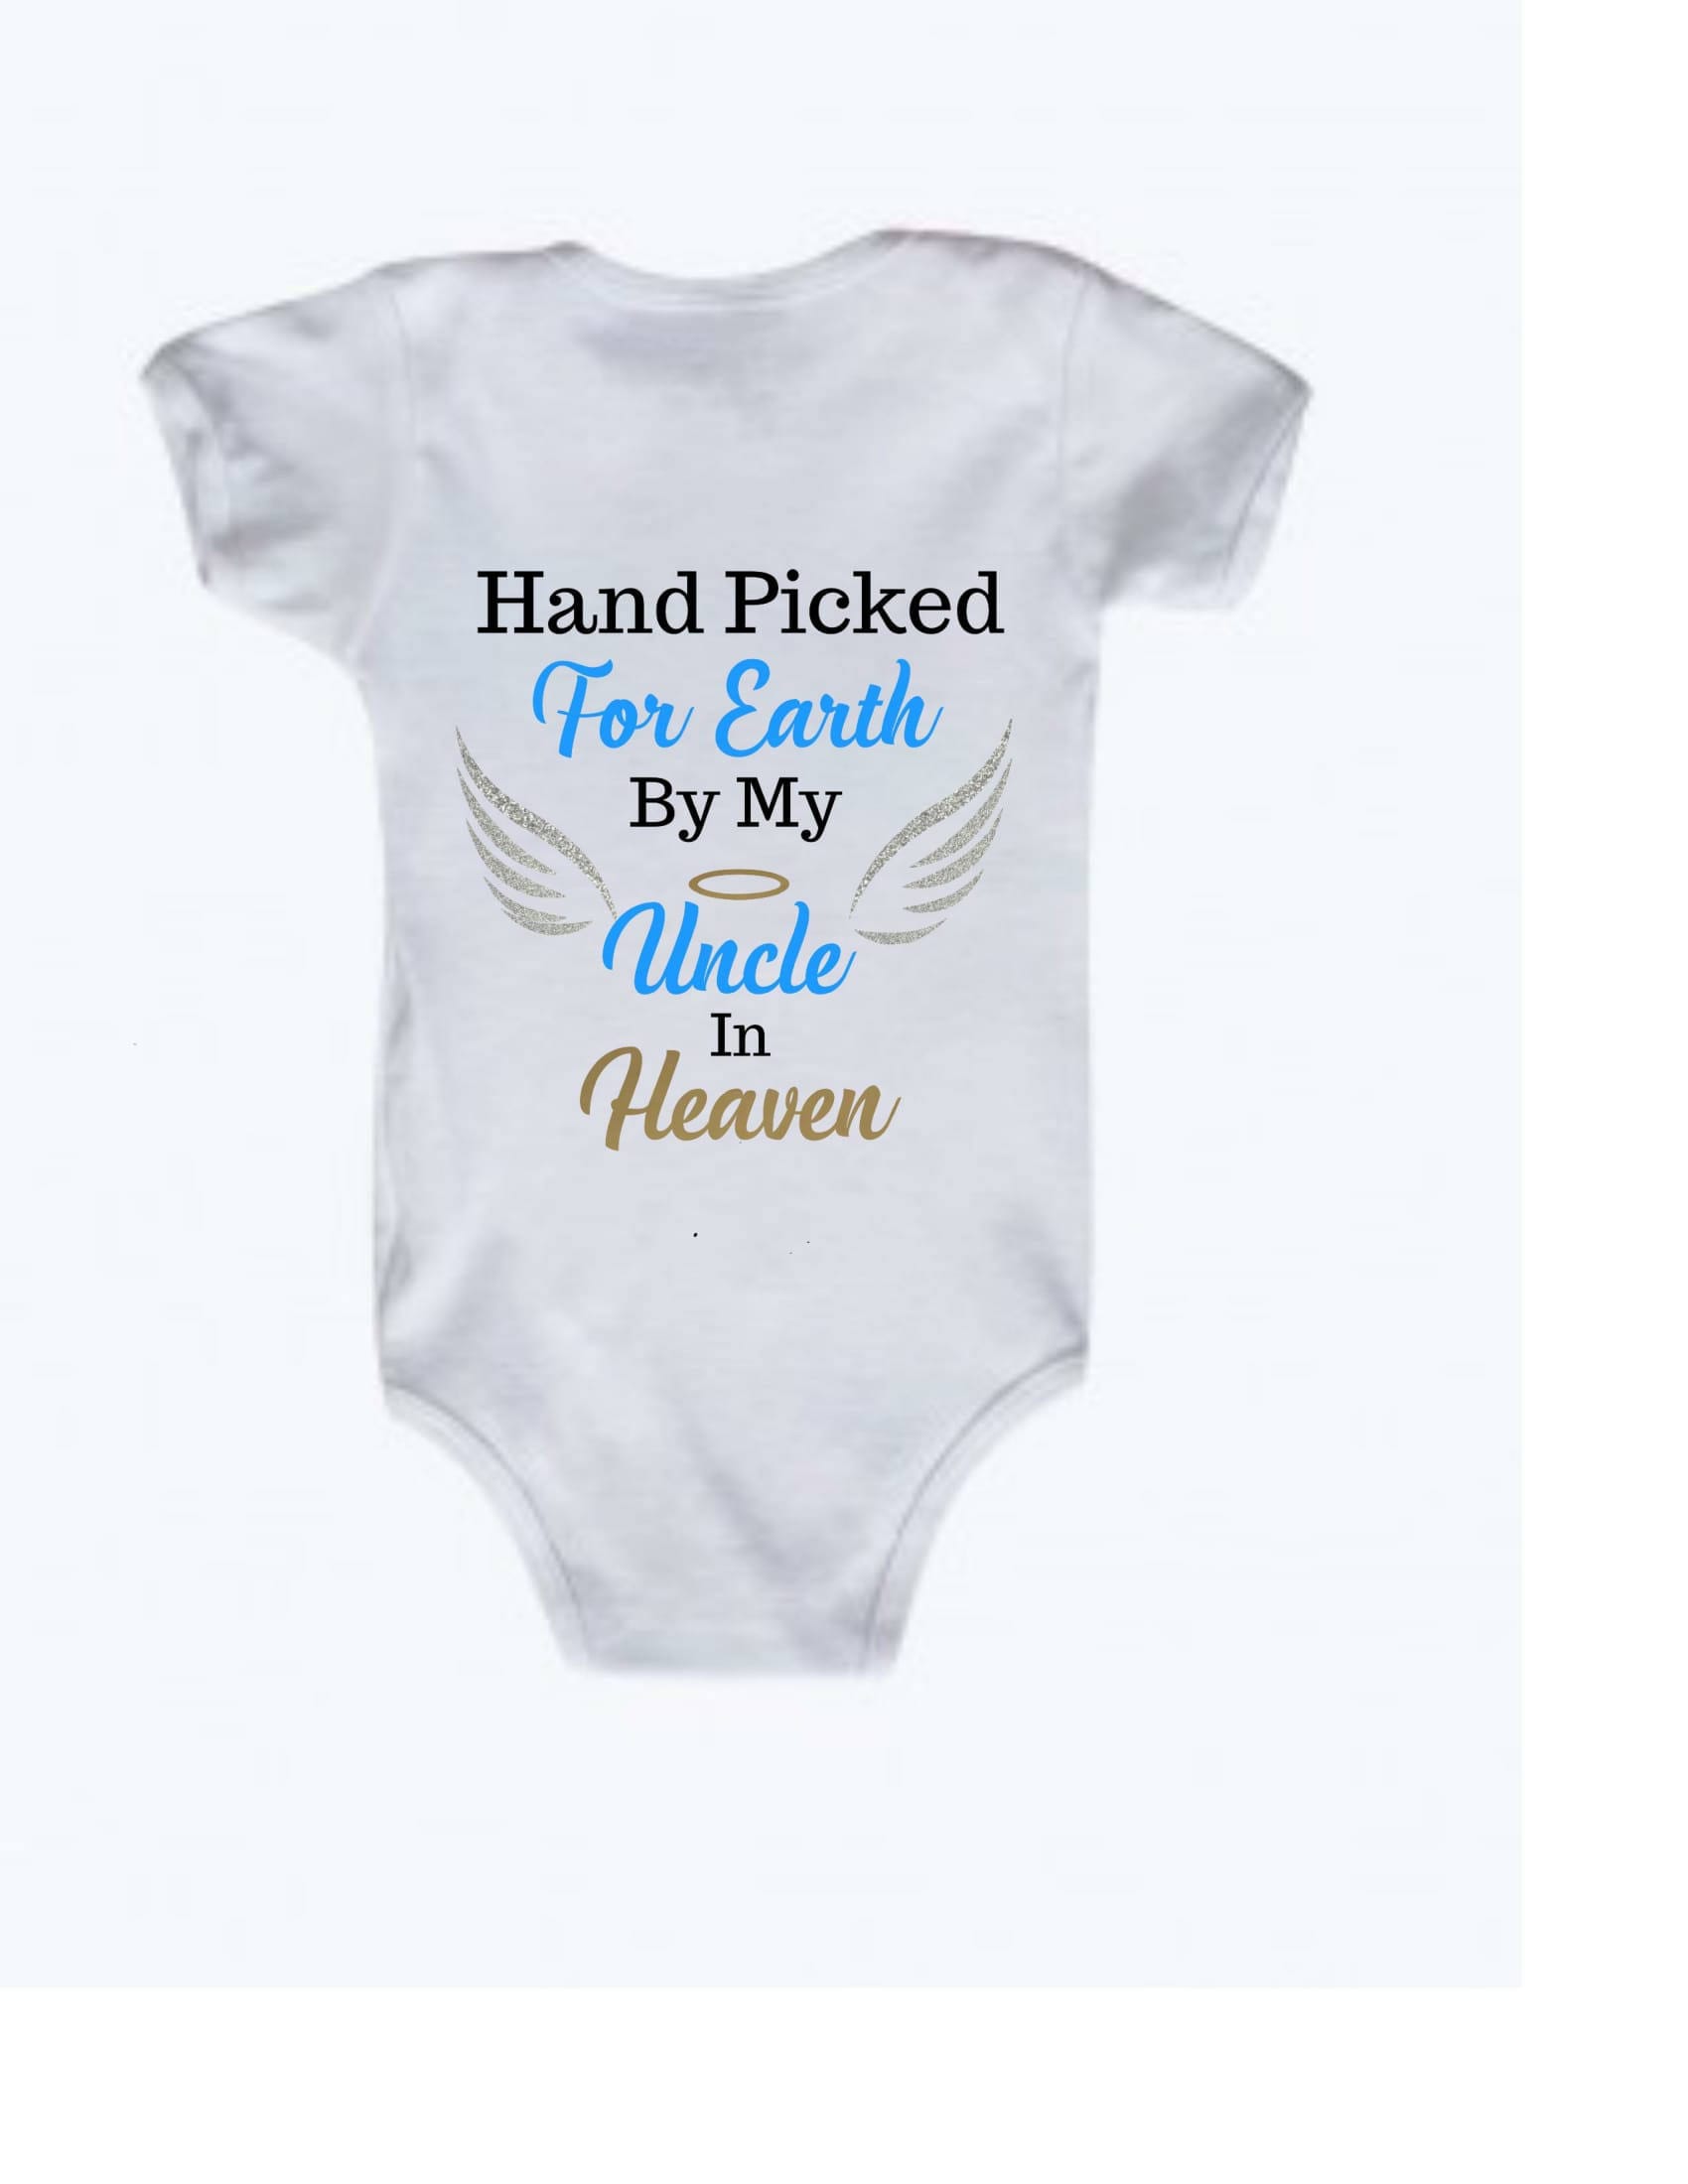 Handpicked For Earth By Uncle Auntie Heaven Baby Girl Boy Bodysuit Vest 290-291 